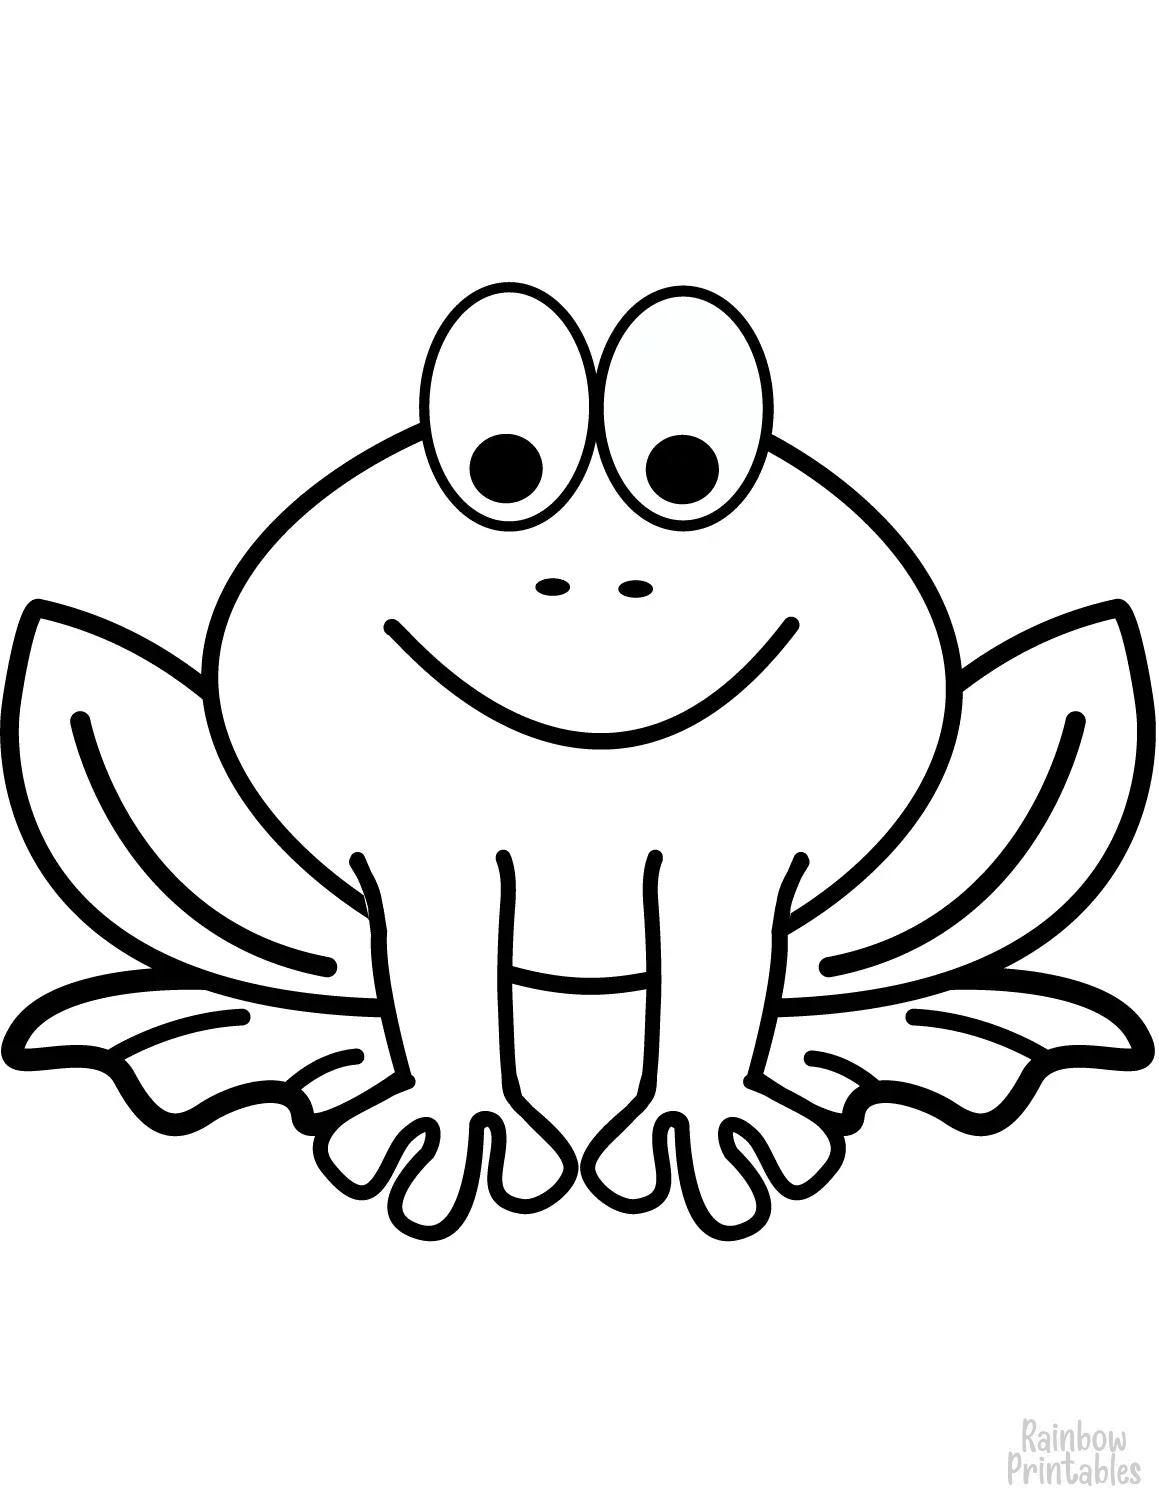 SIMPLE-EASY-line-drawings-CARTOON-FROG-coloring-page-for-kids2